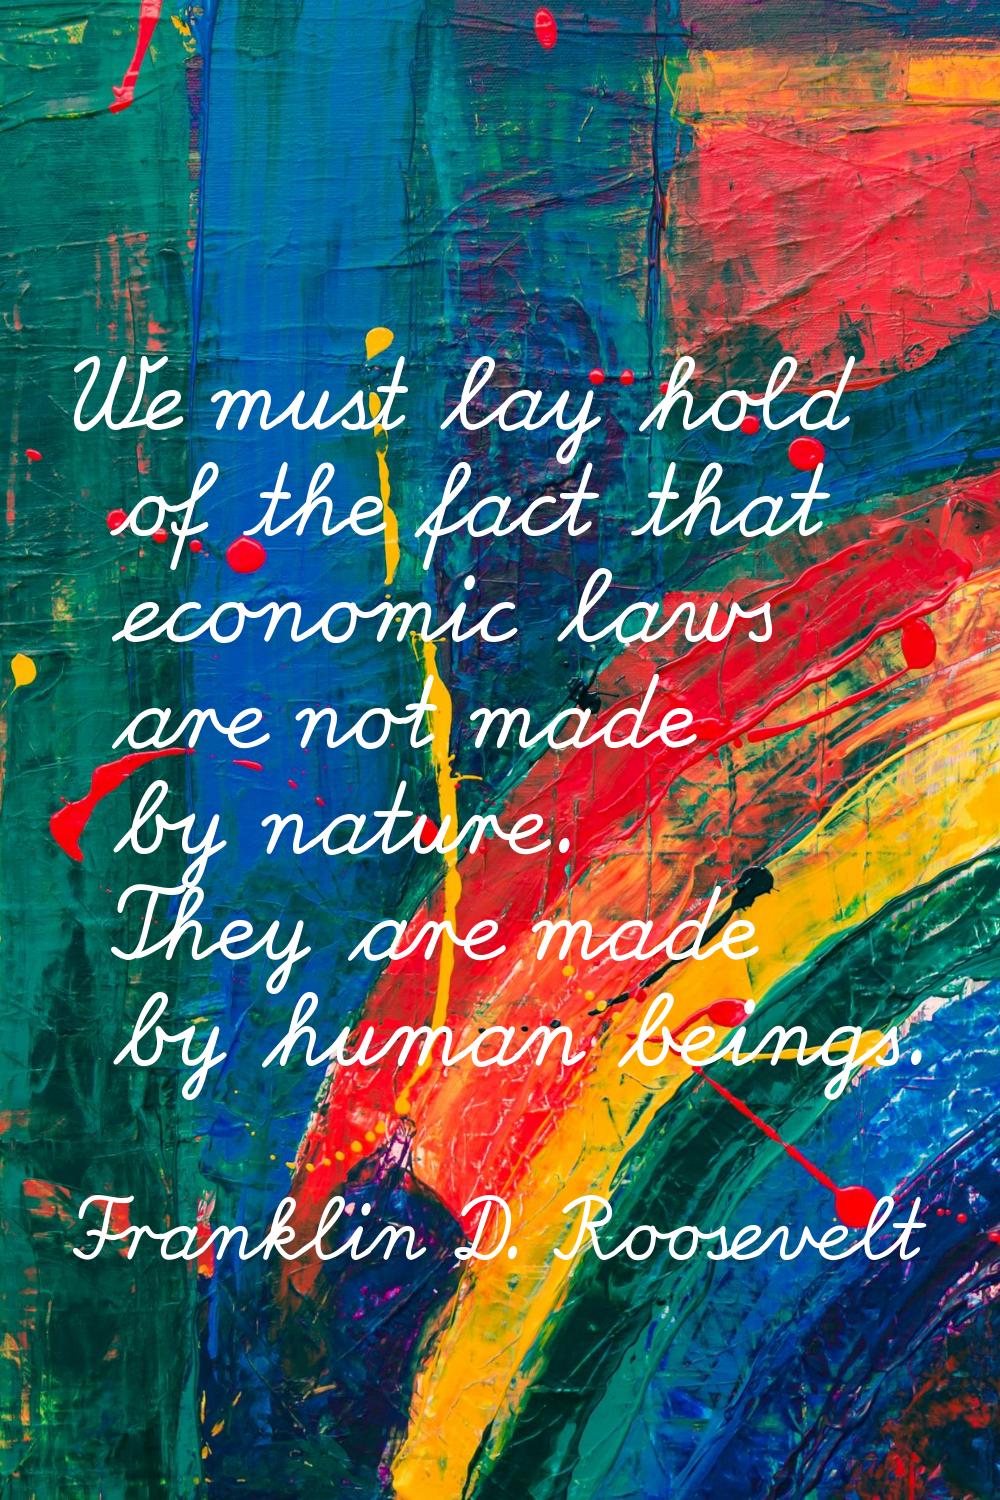 We must lay hold of the fact that economic laws are not made by nature. They are made by human bein